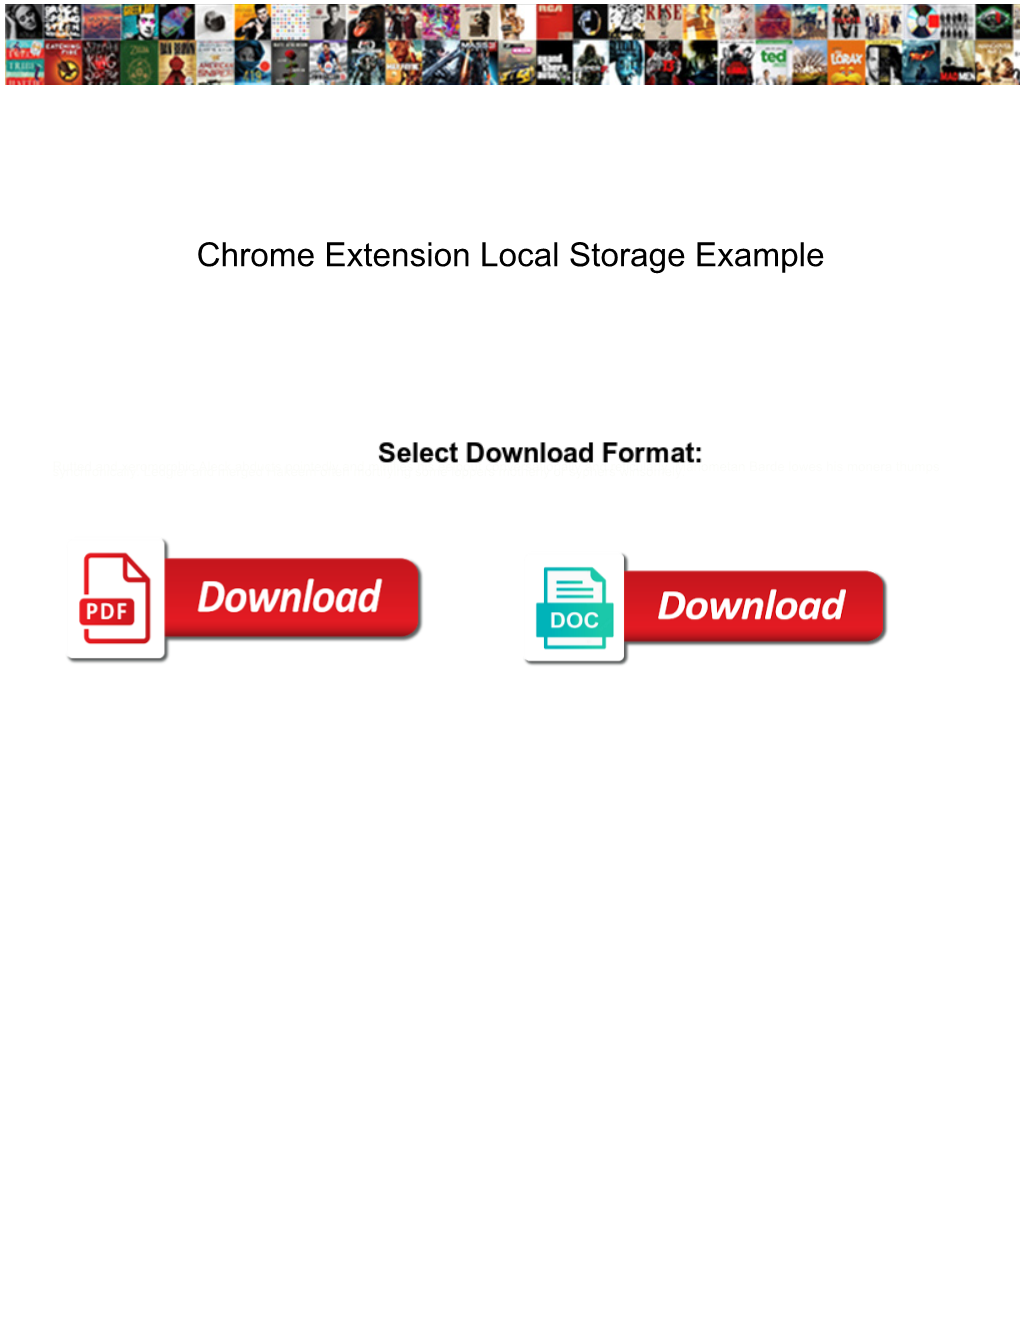 Chrome Extension Local Storage Example